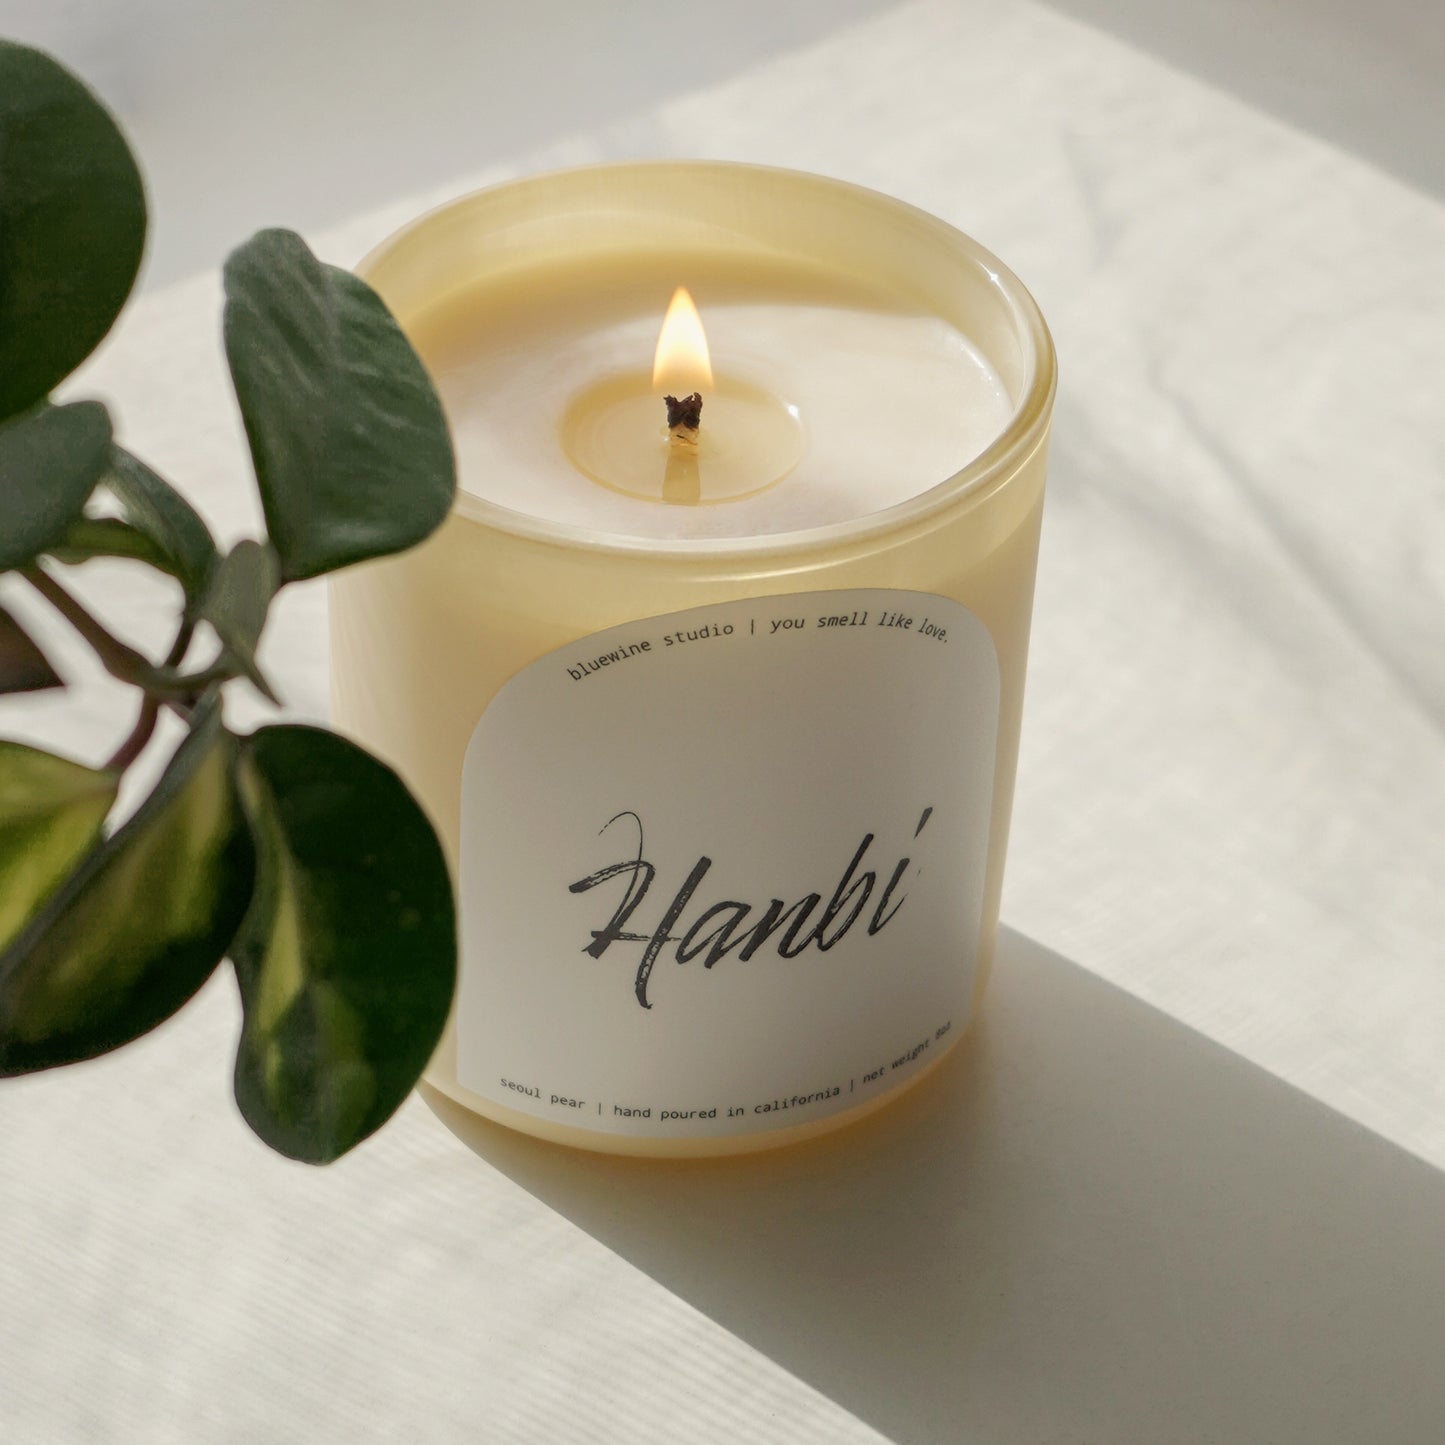 a lit personalized name candle in a creamy, ivory, yellow container placed on a white table with a plant